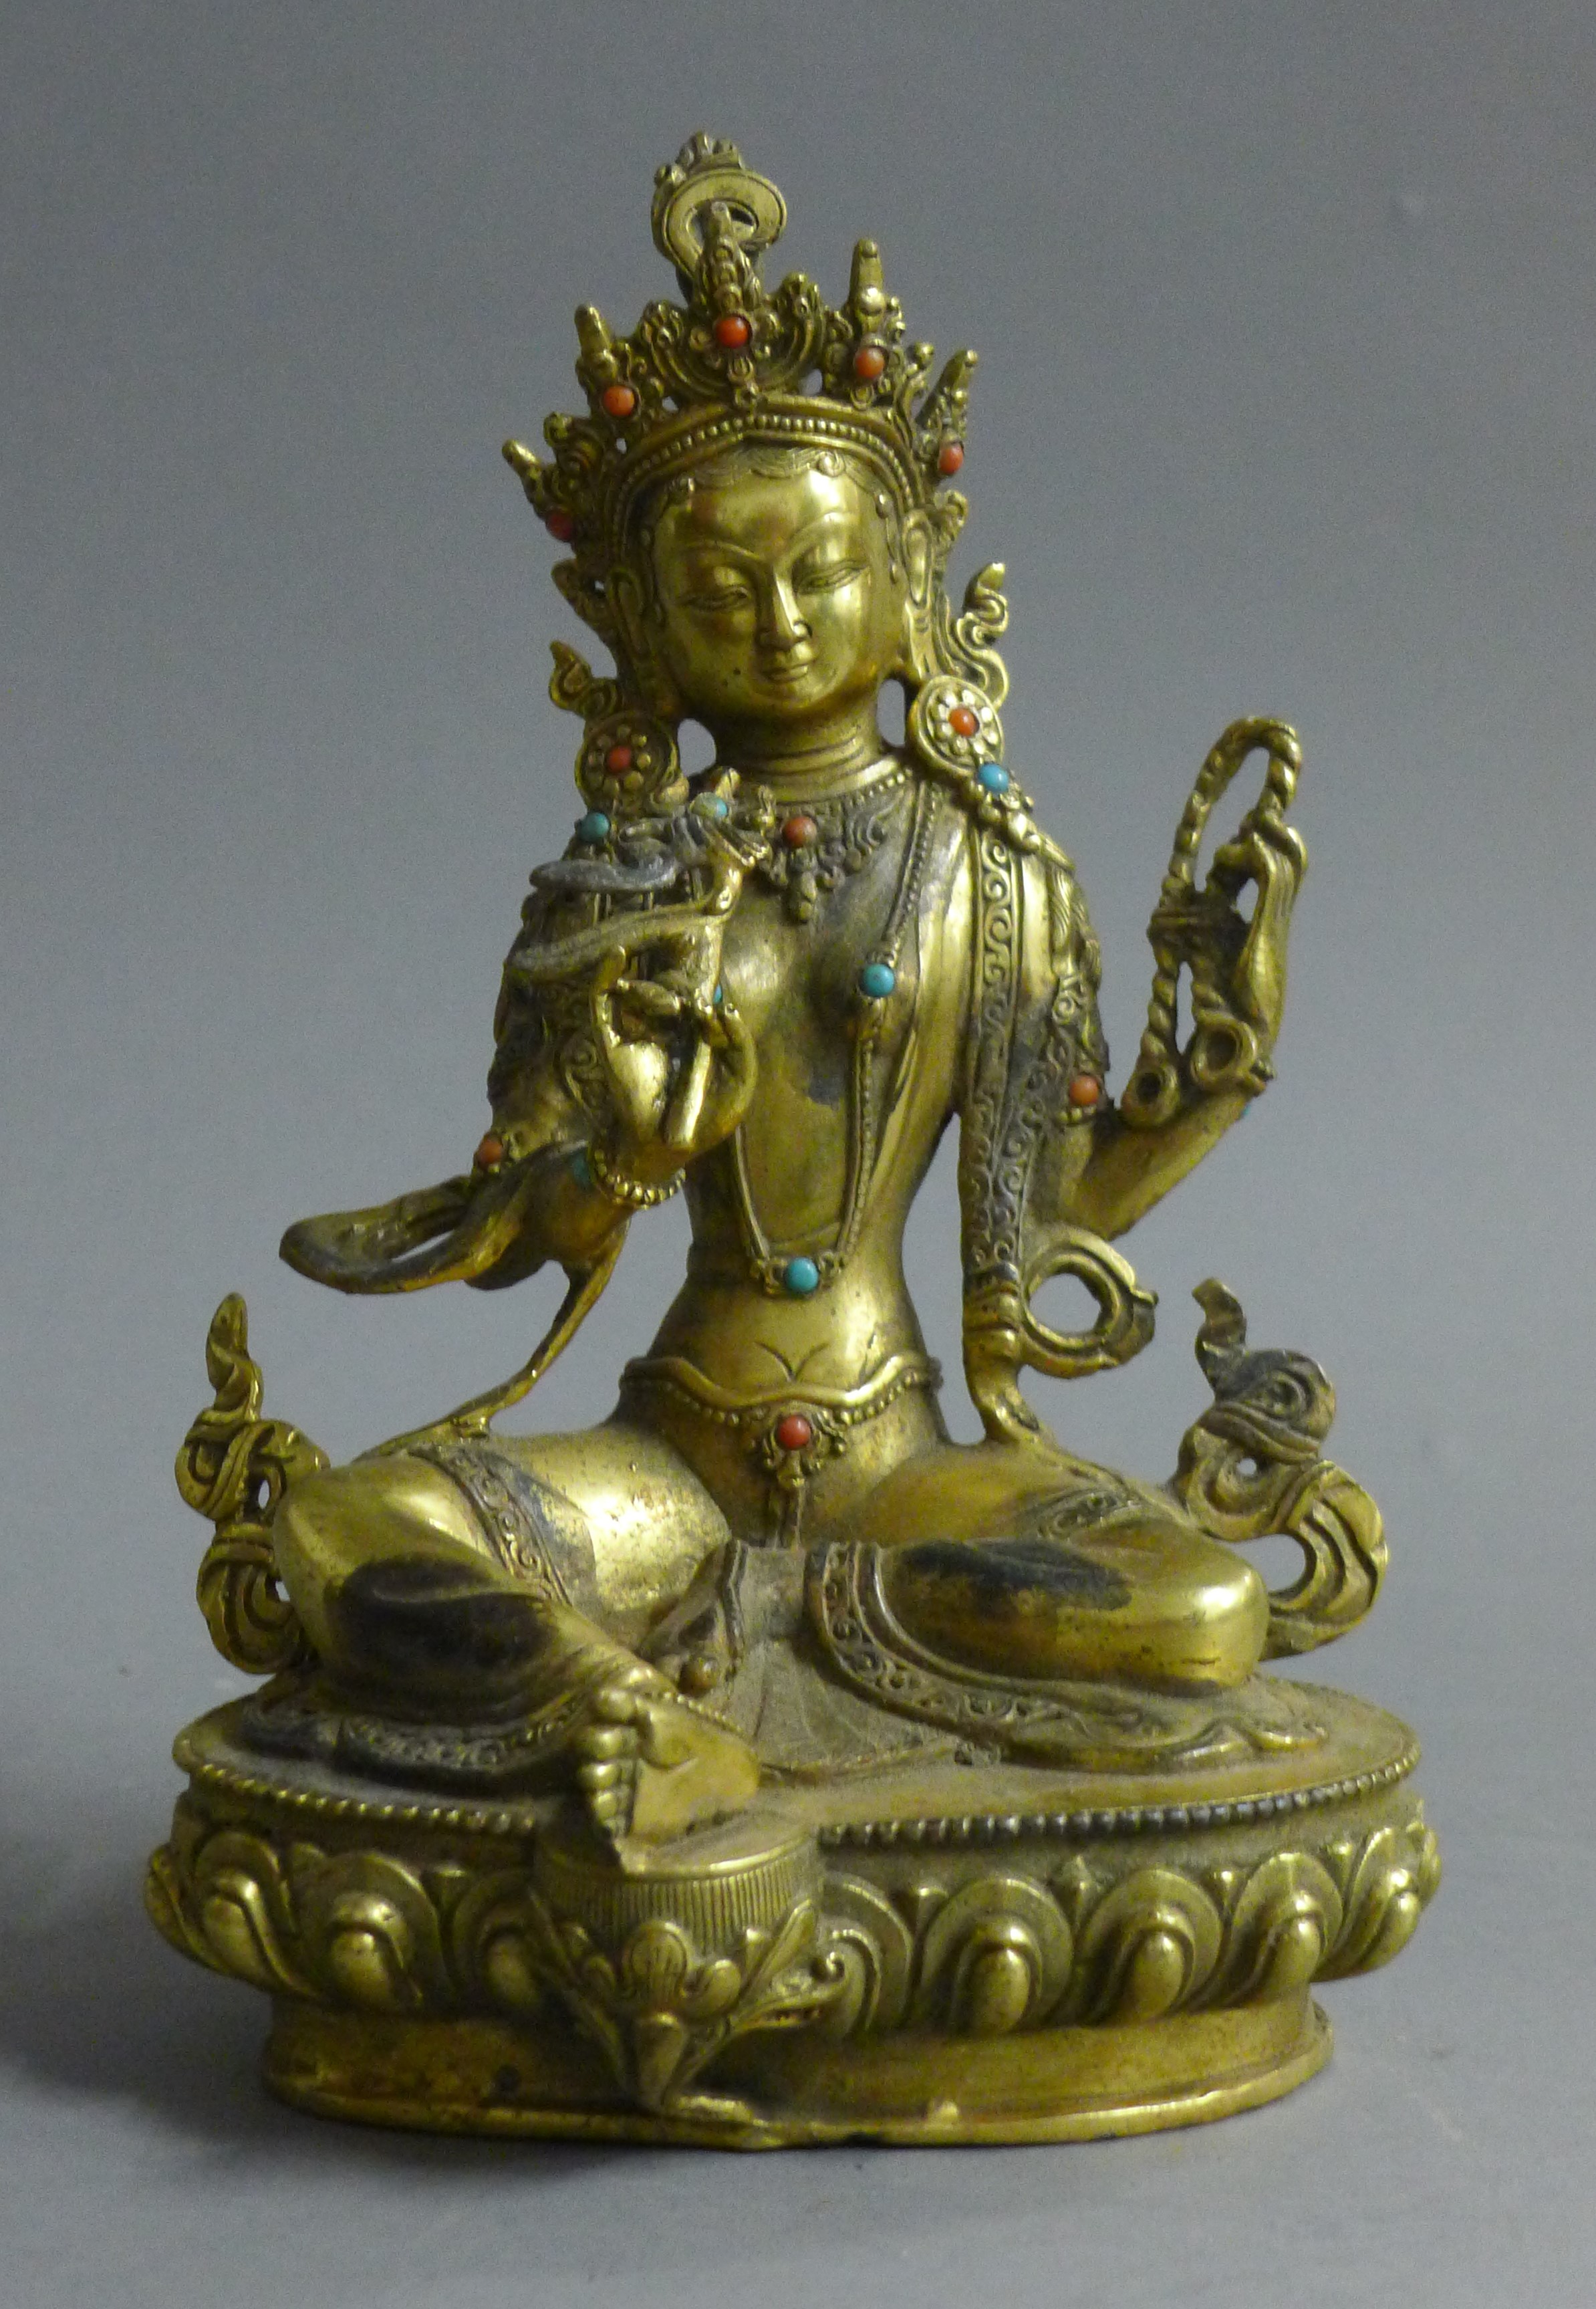 A gilt bronze figure of Buddha decorated with turquoise and coral. 21.5 cm high.